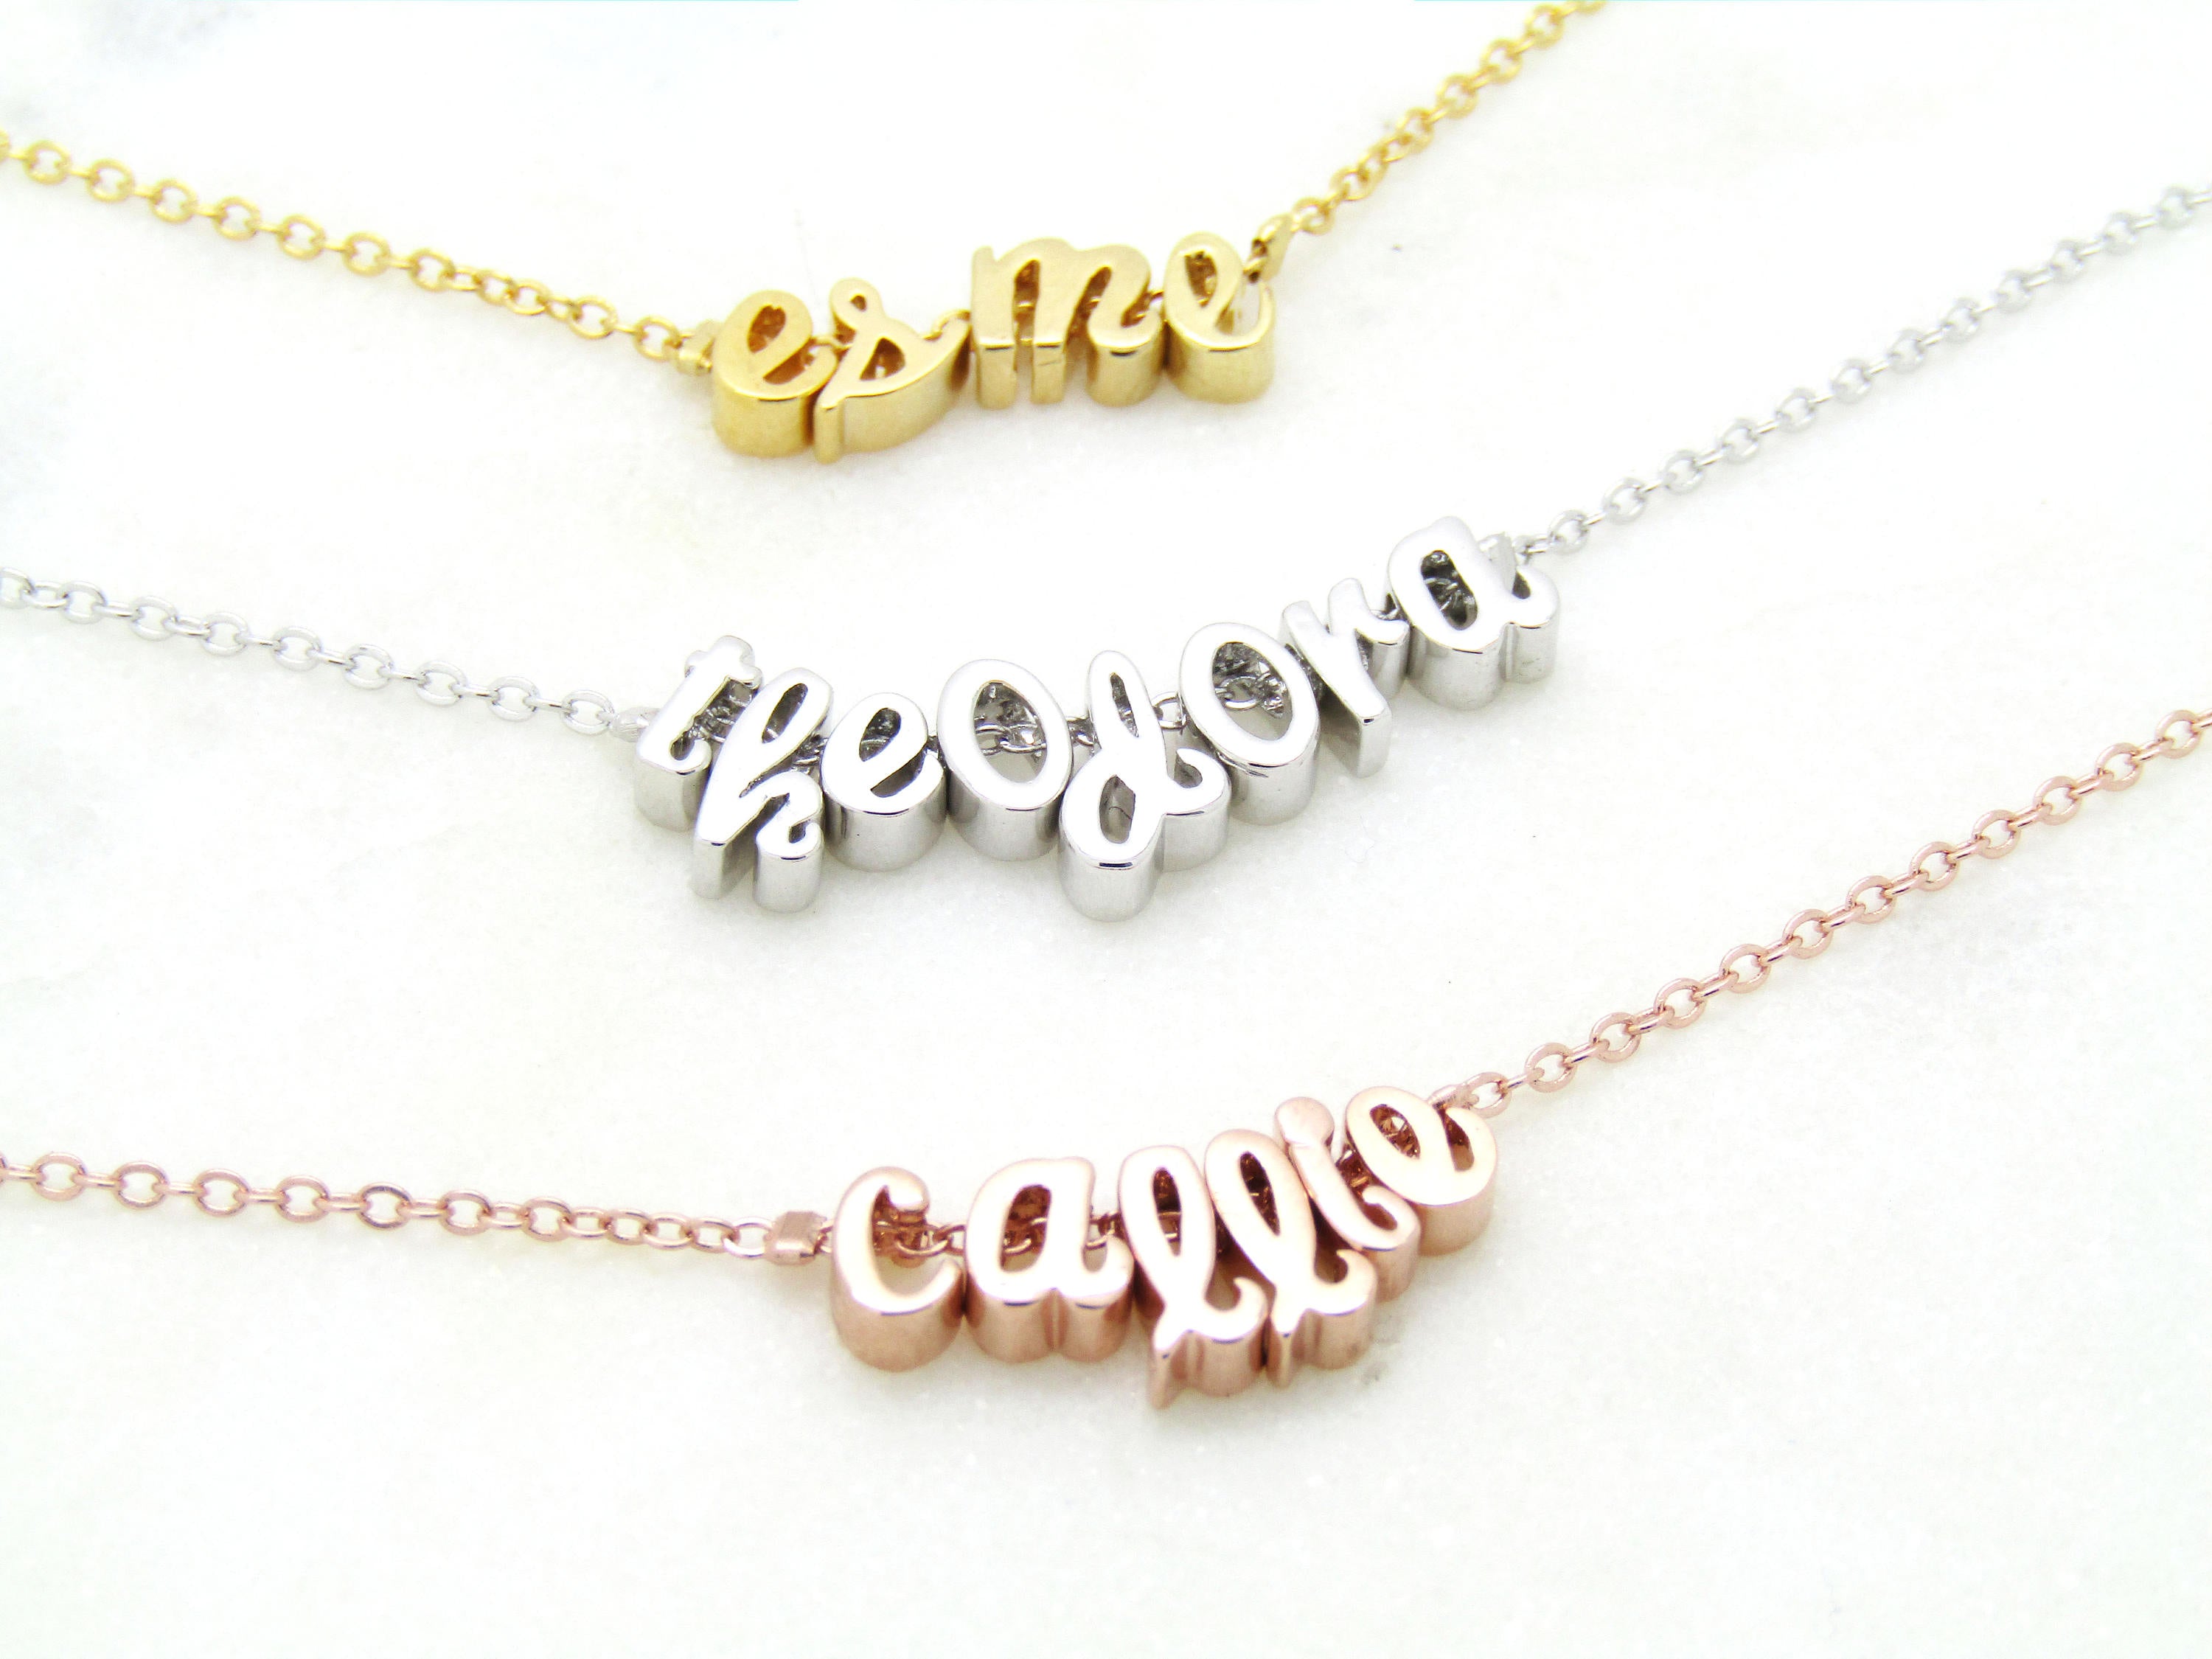 Custom Tiny Name Necklace - horizontal bar custom name necklace in gold,  silver, rose gold